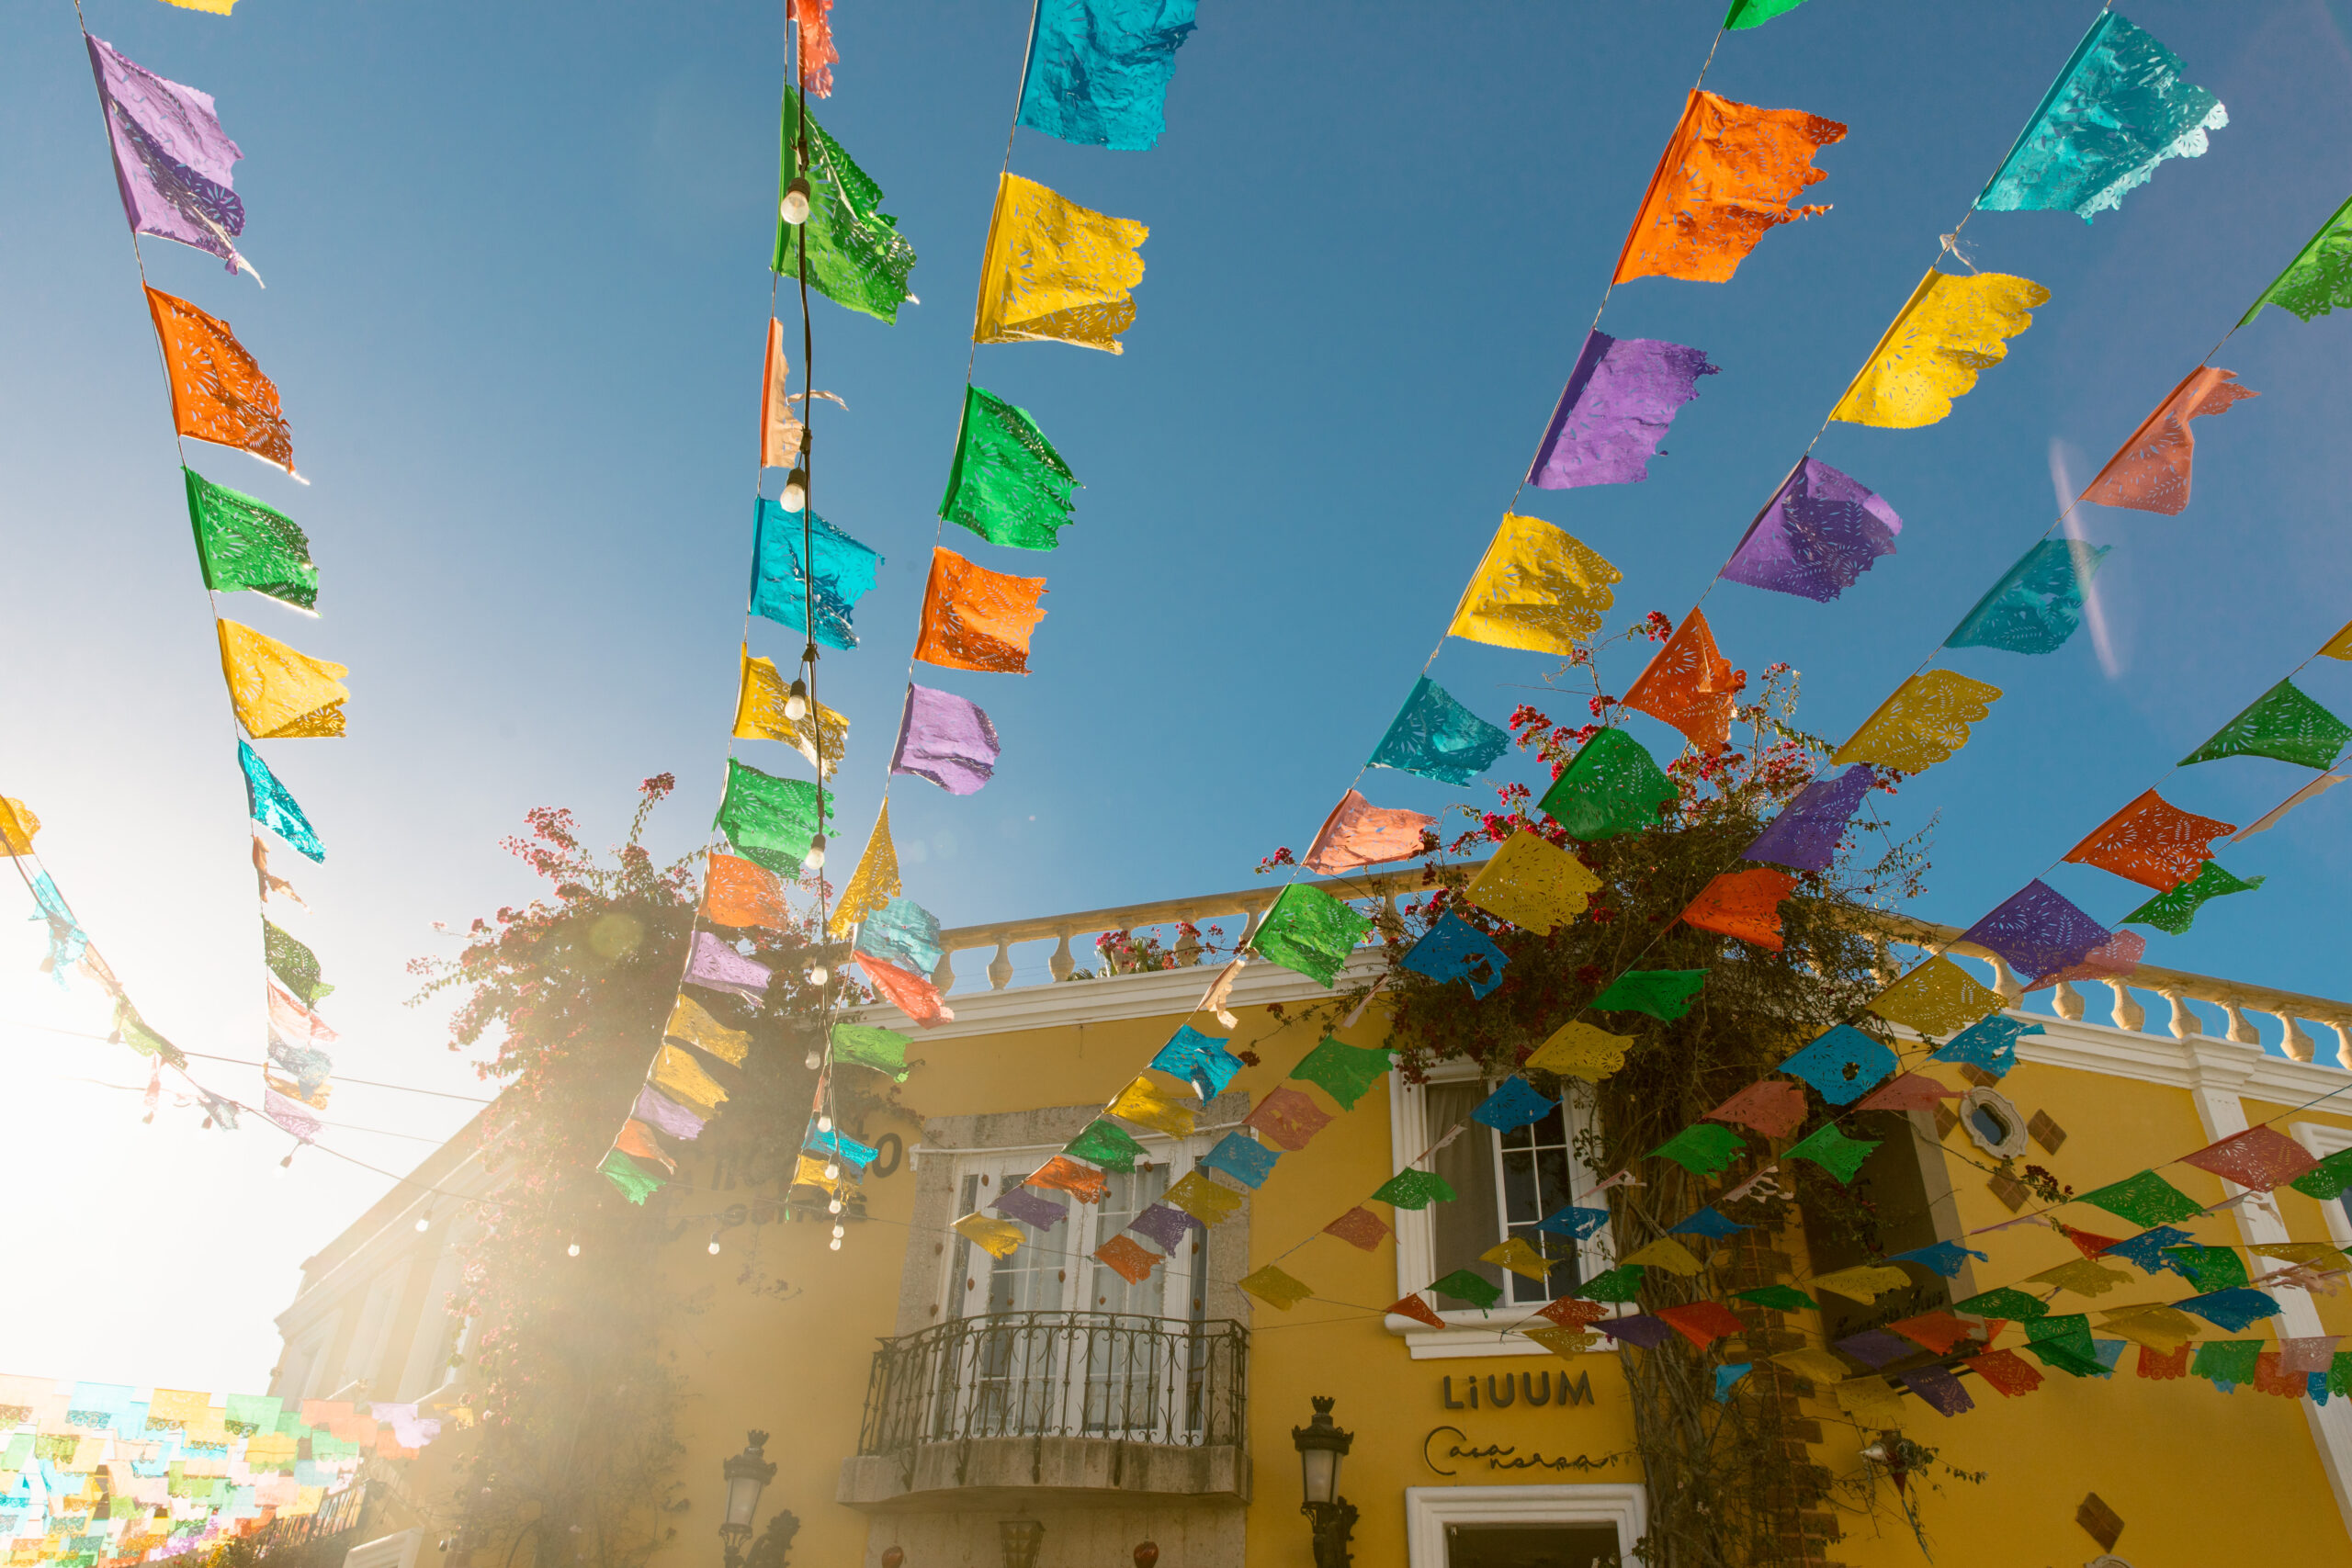 colorful papel picado banners blowing in wind blue skies Yellow LiUUM building. Downtown San Jose Del Cabo Mexican architecture